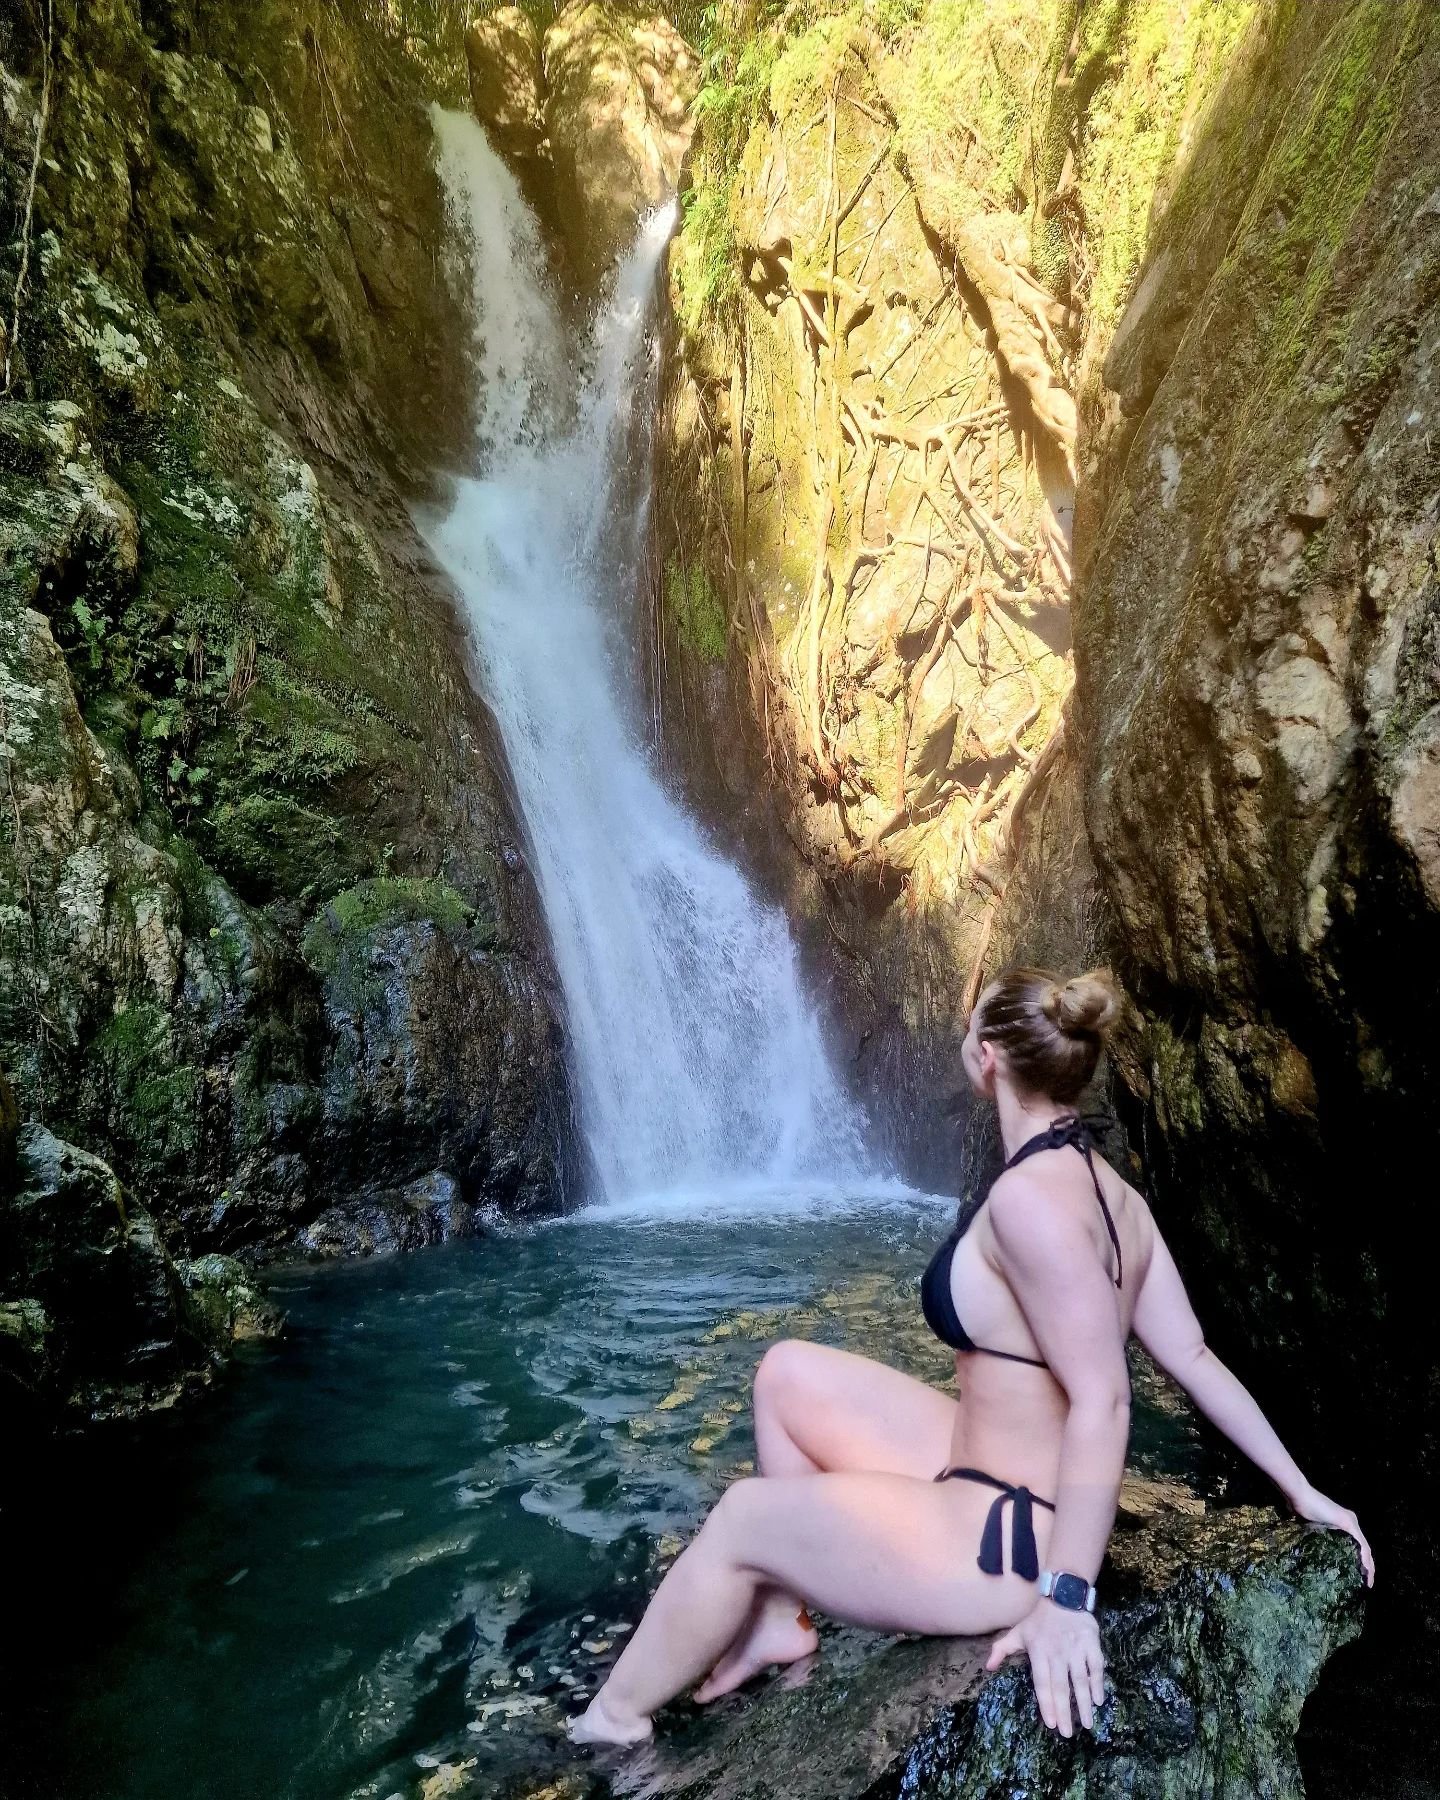 The climb to this was so worth it 😍
Photos/videos just don't do these sites justice !

#fairyfalls #queensland #cairns #Australia #waterfall